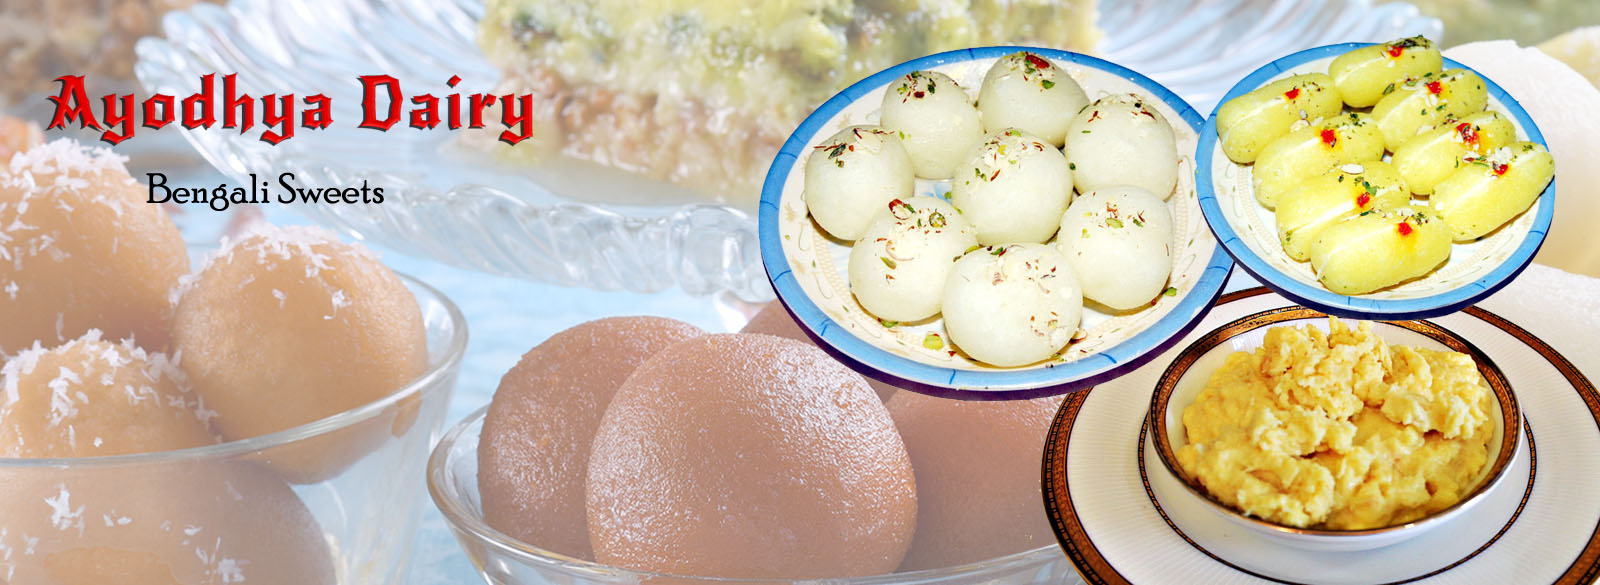 Bengali Sweets Suppliers